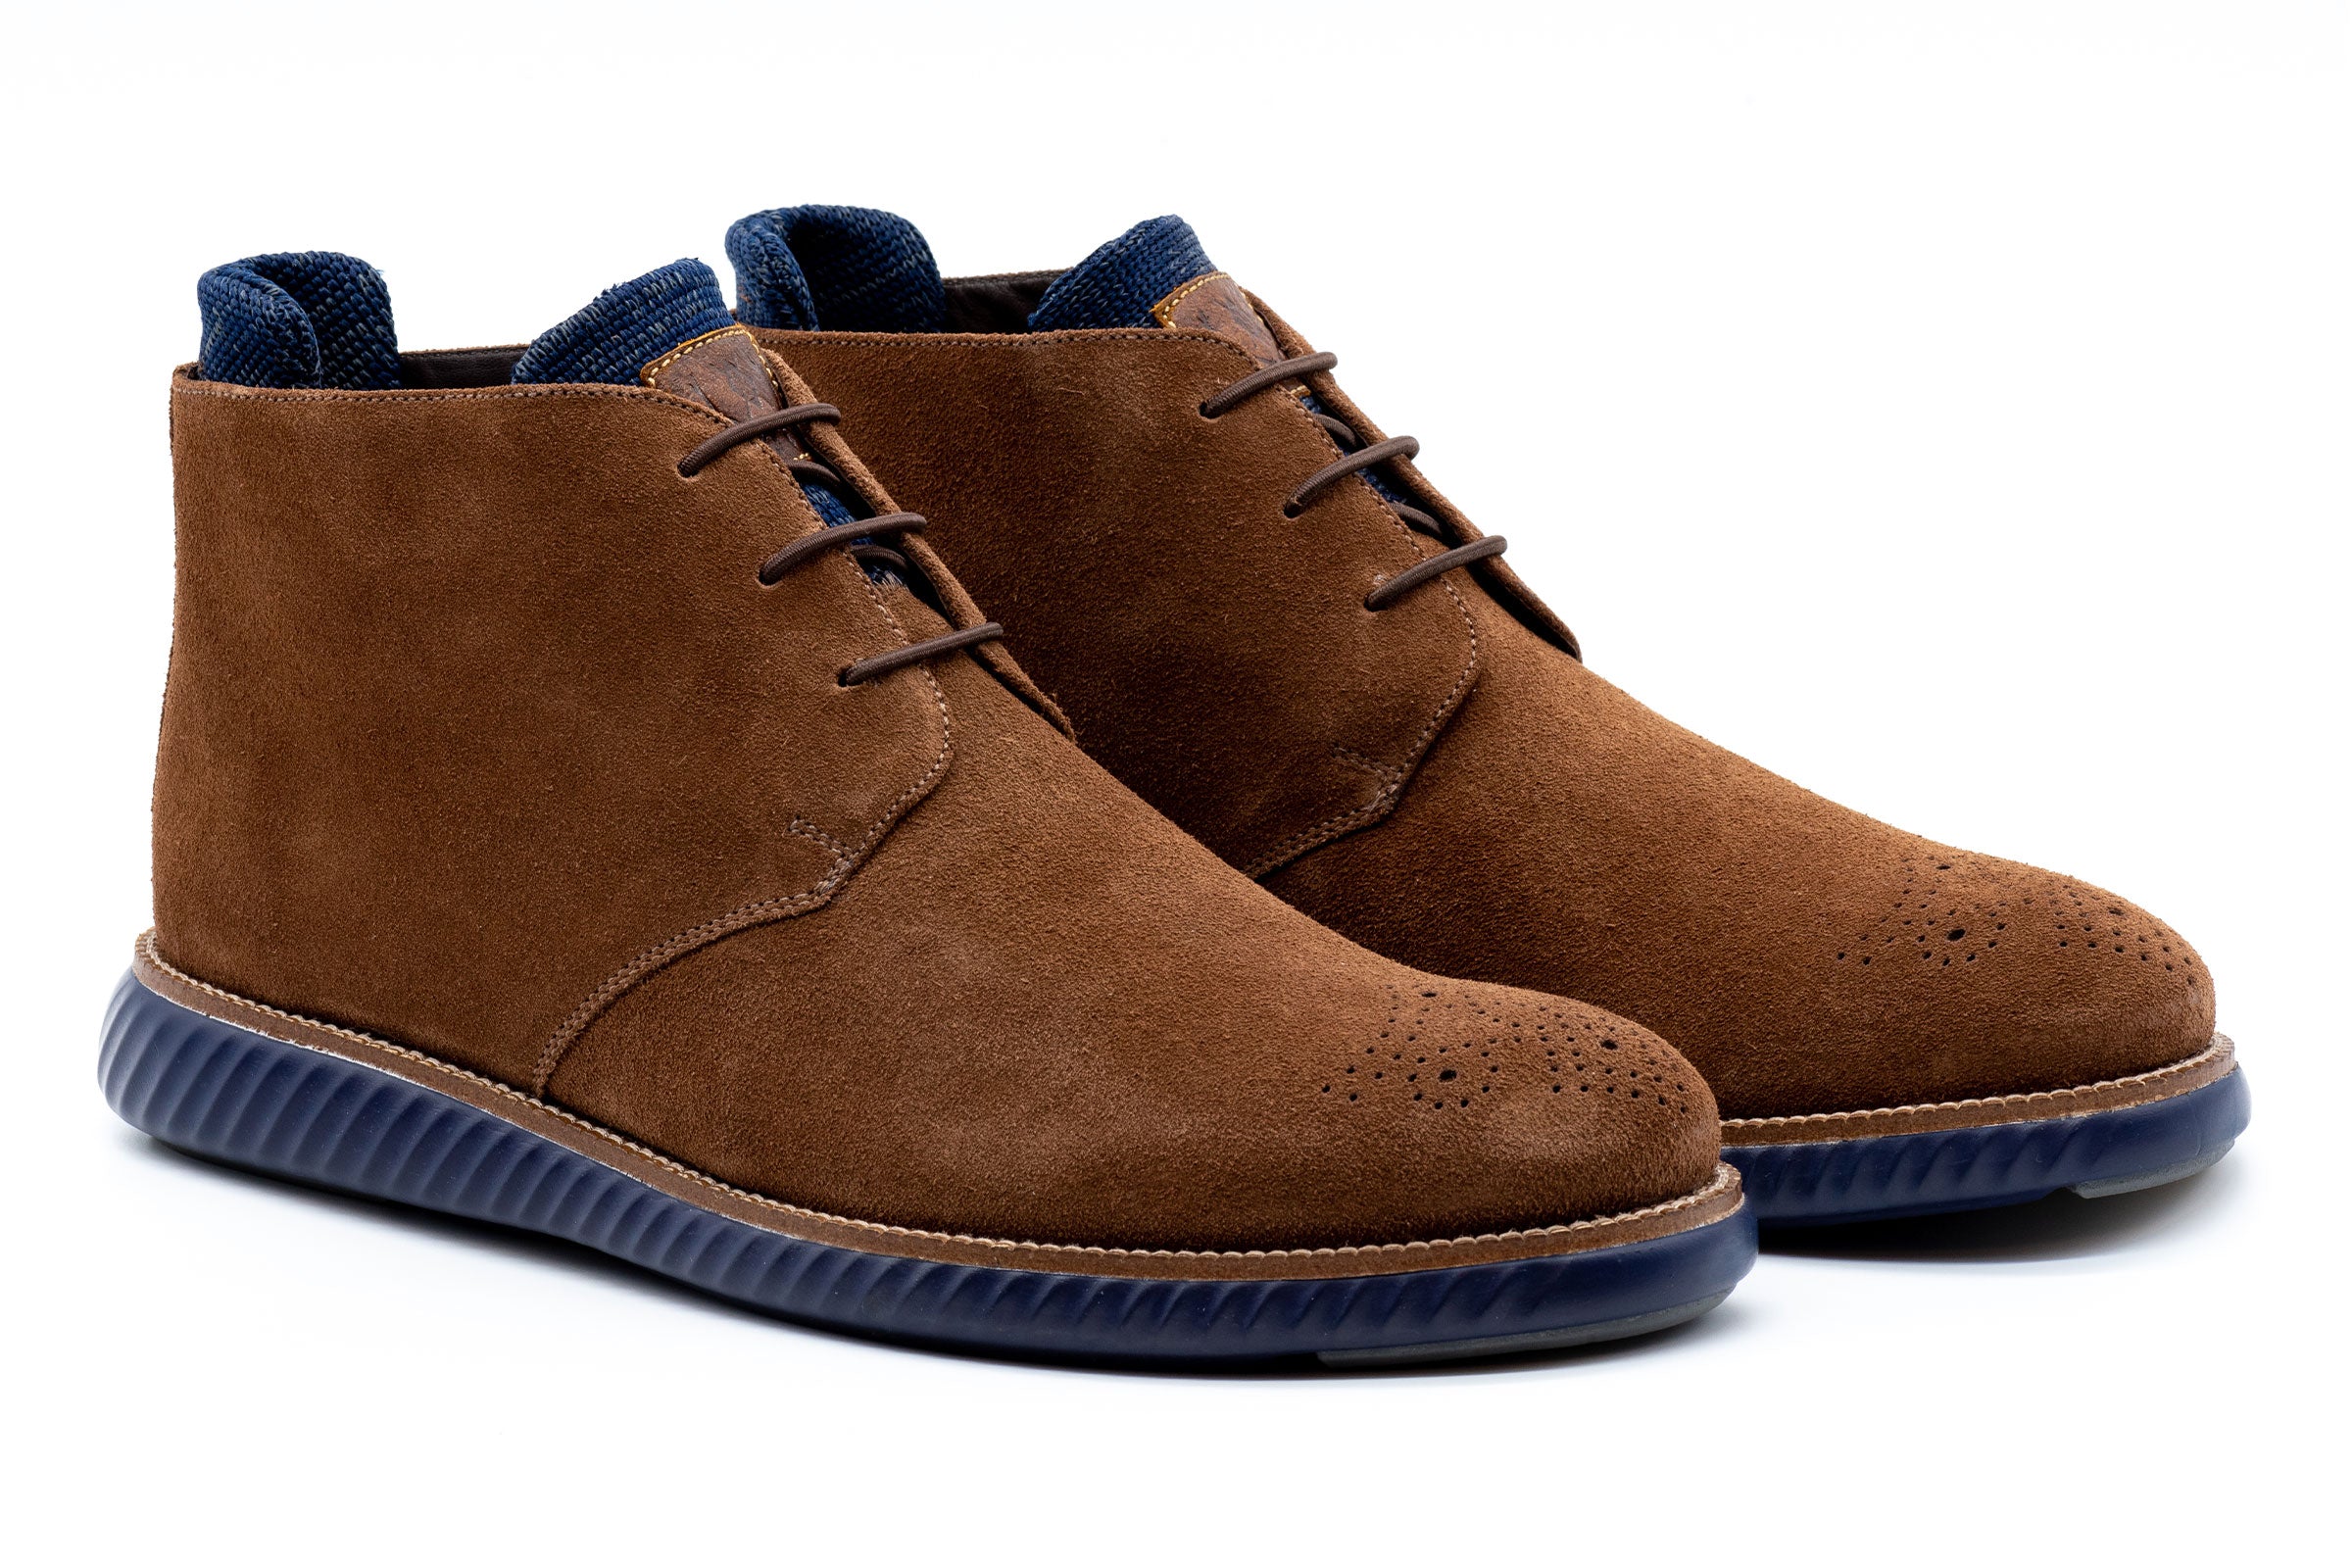 Countryaire Suede Chukka Boots - Tobacco